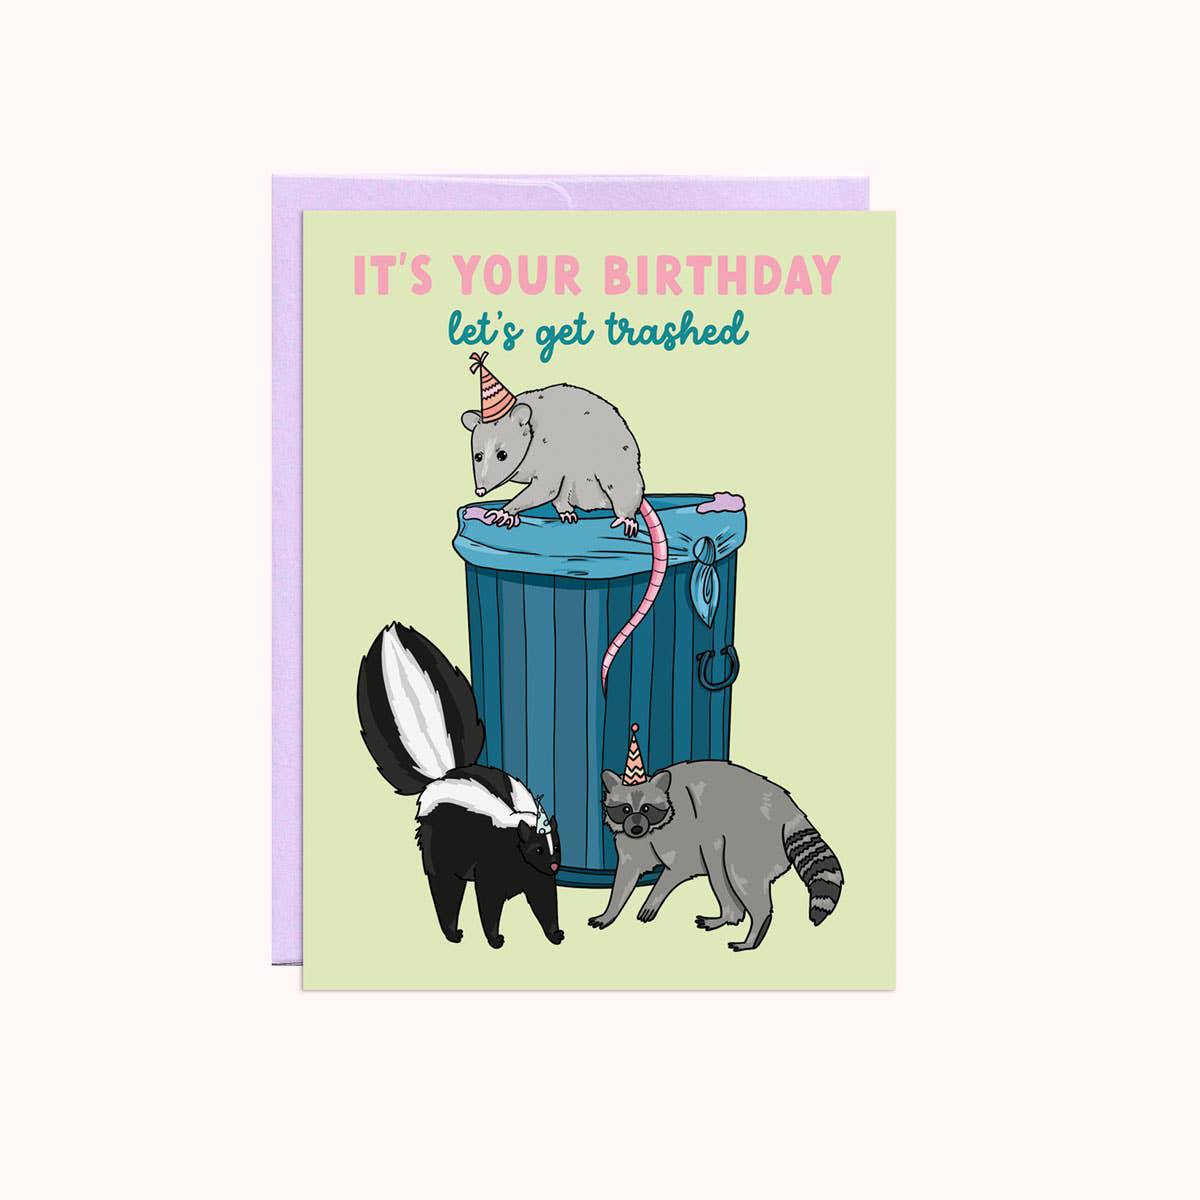 Party Mountain Paper Co. | Trashed Birthday Greeting Card, The Local Space, Local Canadian Brands